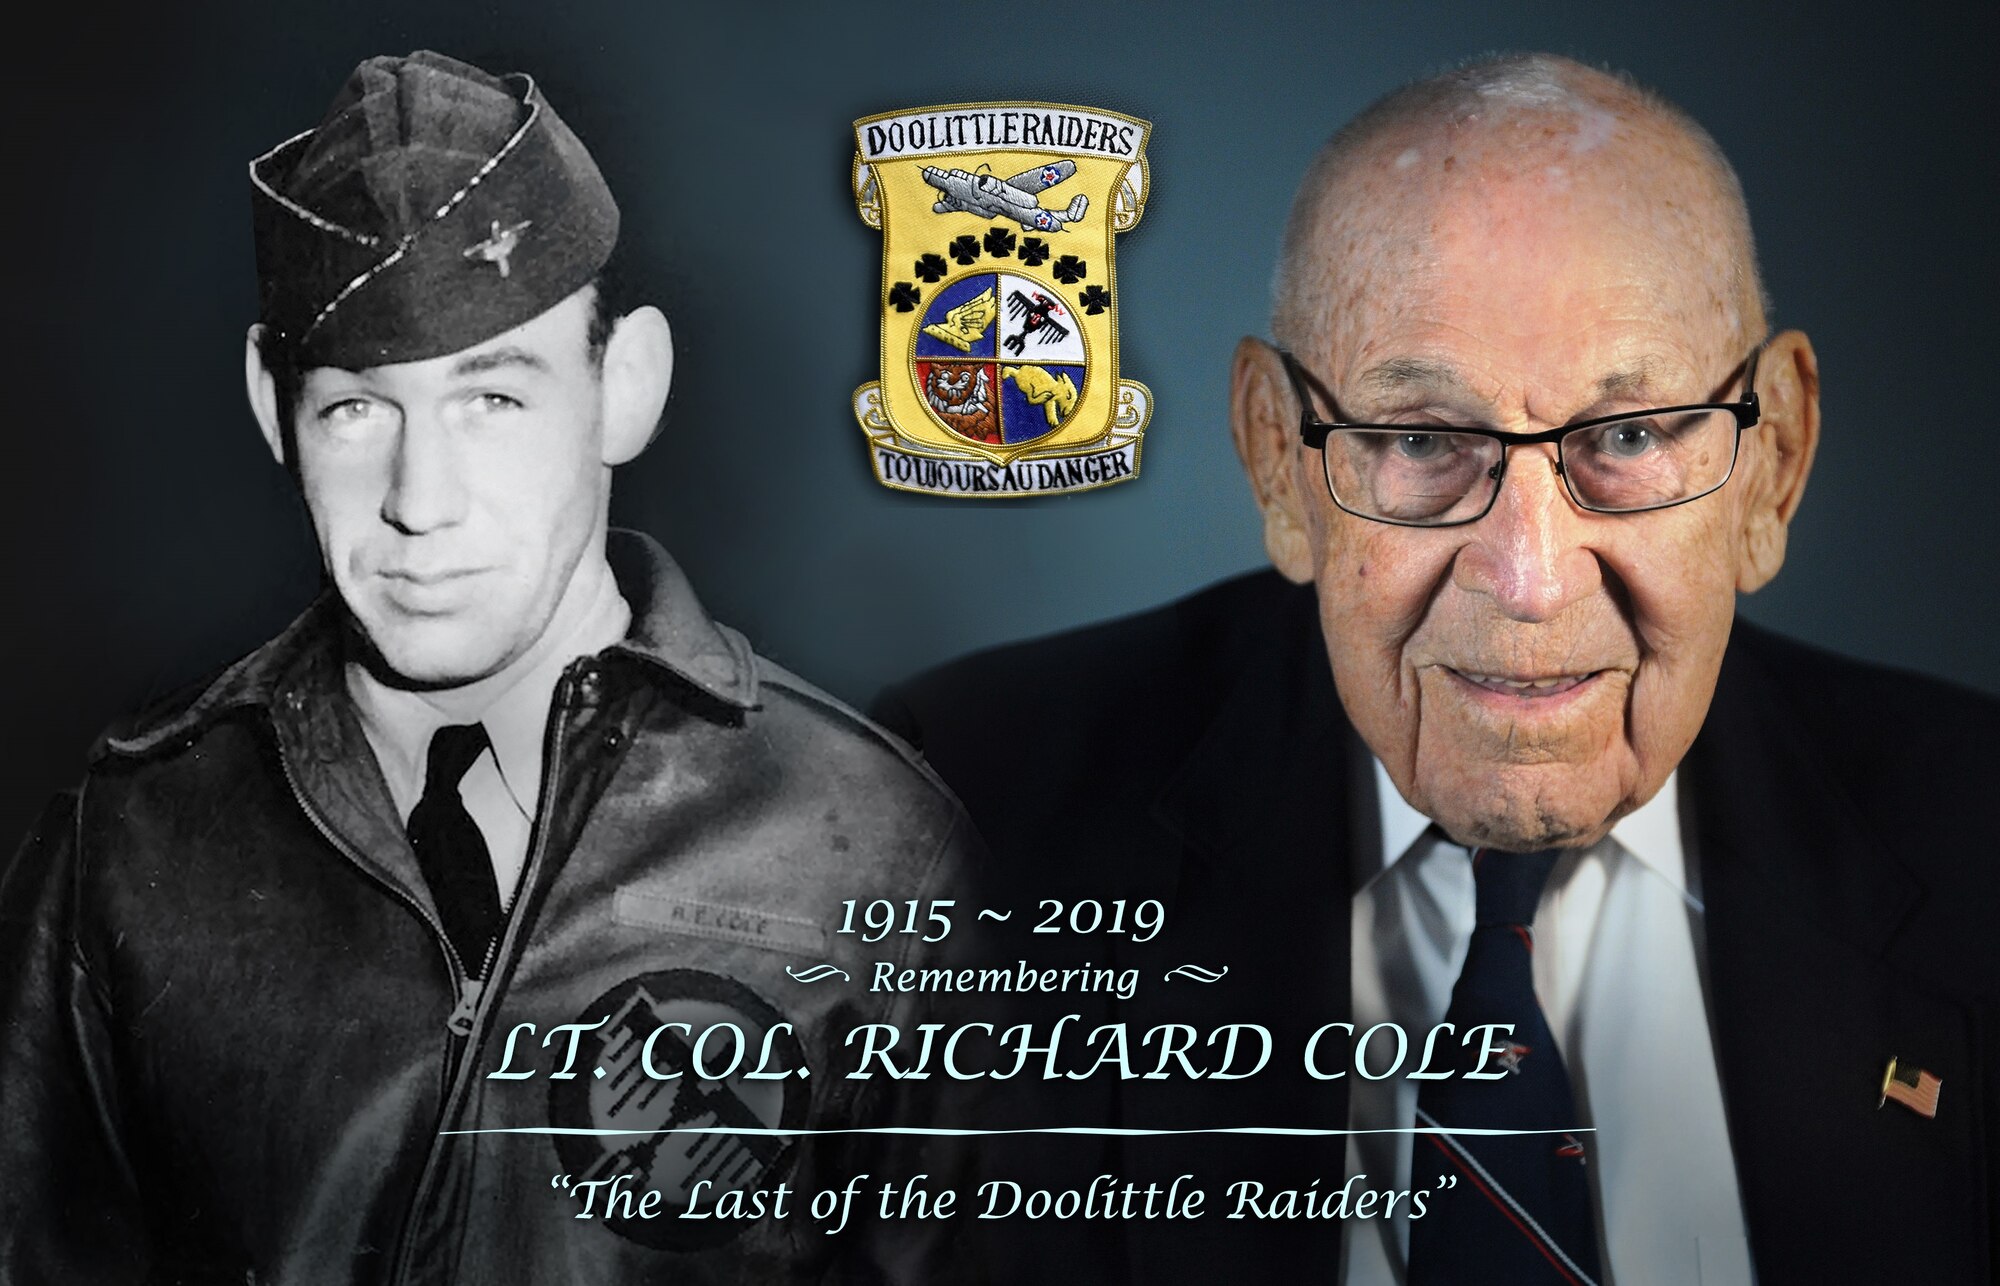 Retired U.S. Air Force Lt. Col. Robert "Dick" E. Cole was a B-25 Mitchell bomber co-pilot and survivor of the Doolittle Raid on Tokyo during World War II. Cole, who was the final surviving Doolittle Raider, passed away April 9, 2019 in San Antonio.